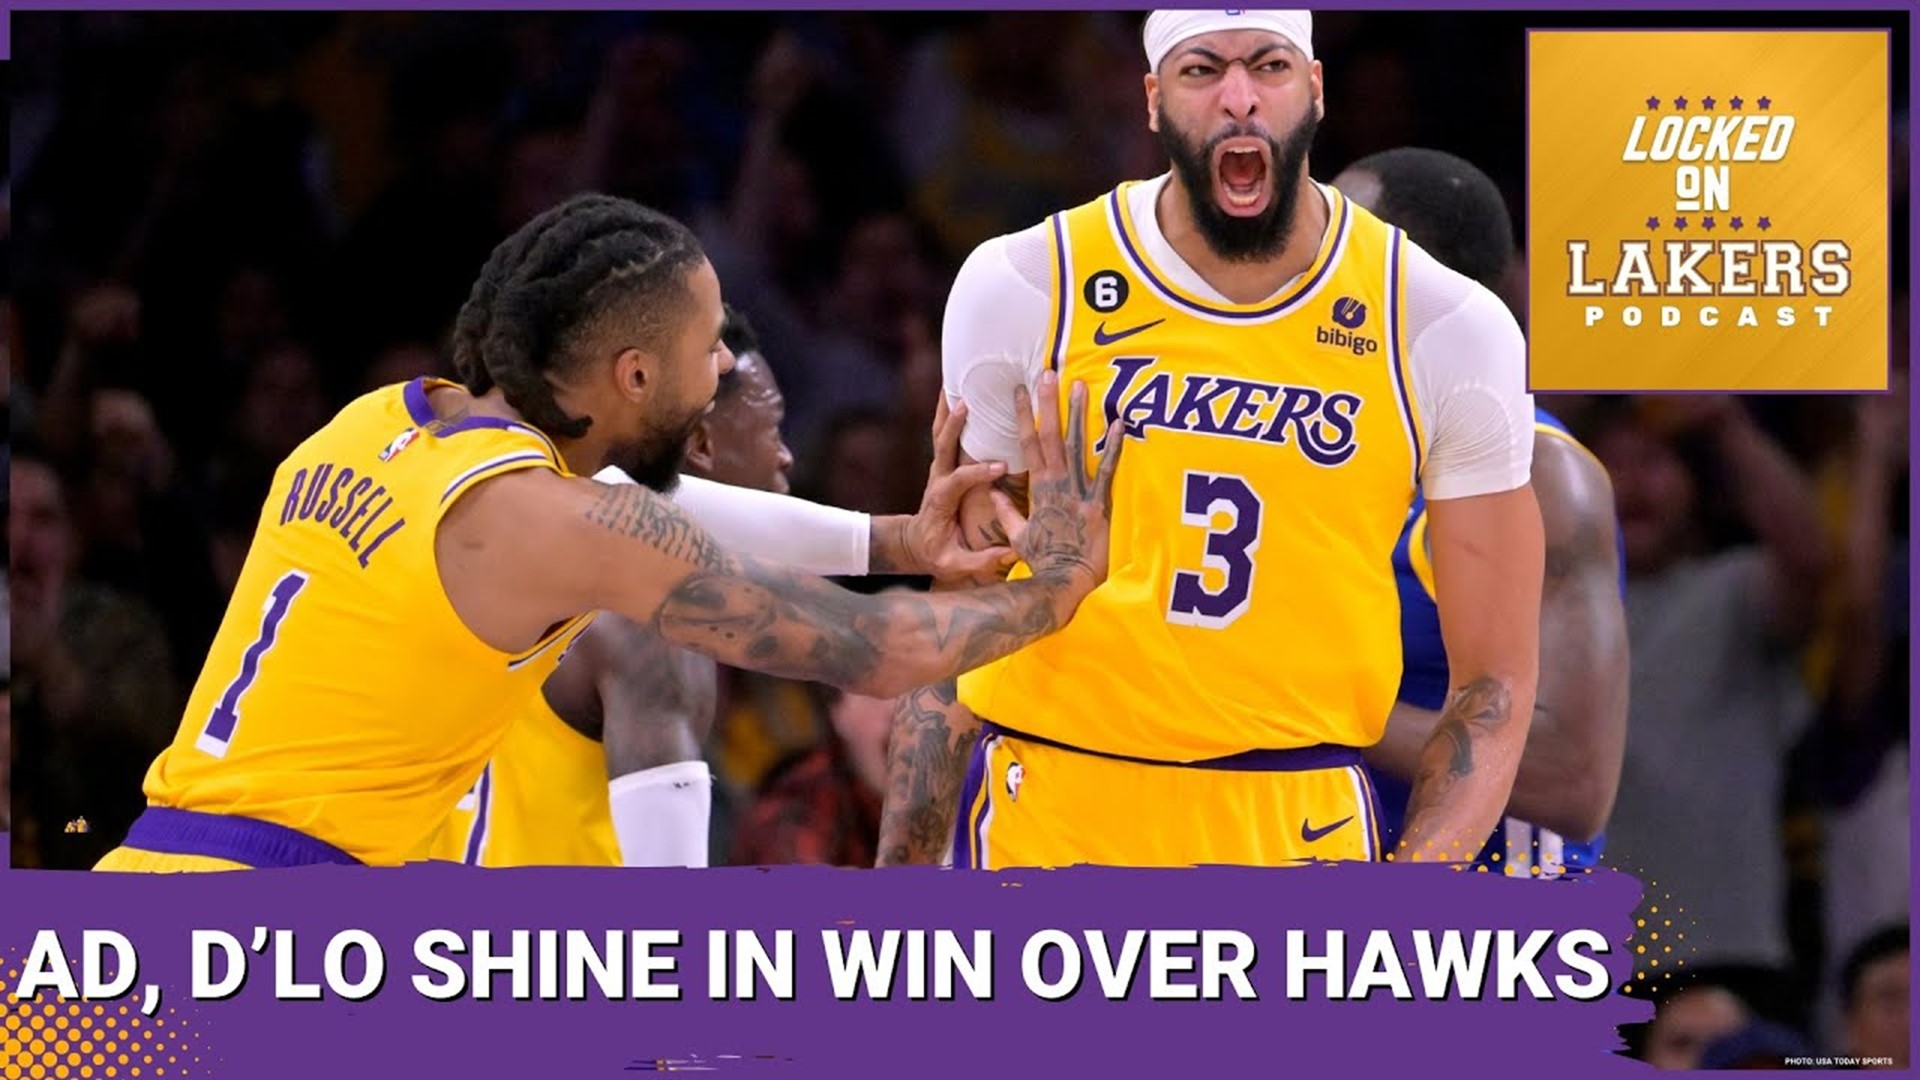 On Monday, we discussed how the Lakers were entering a critical stretch of games that could make or break the quest to, at minimum, maintain the nine seed